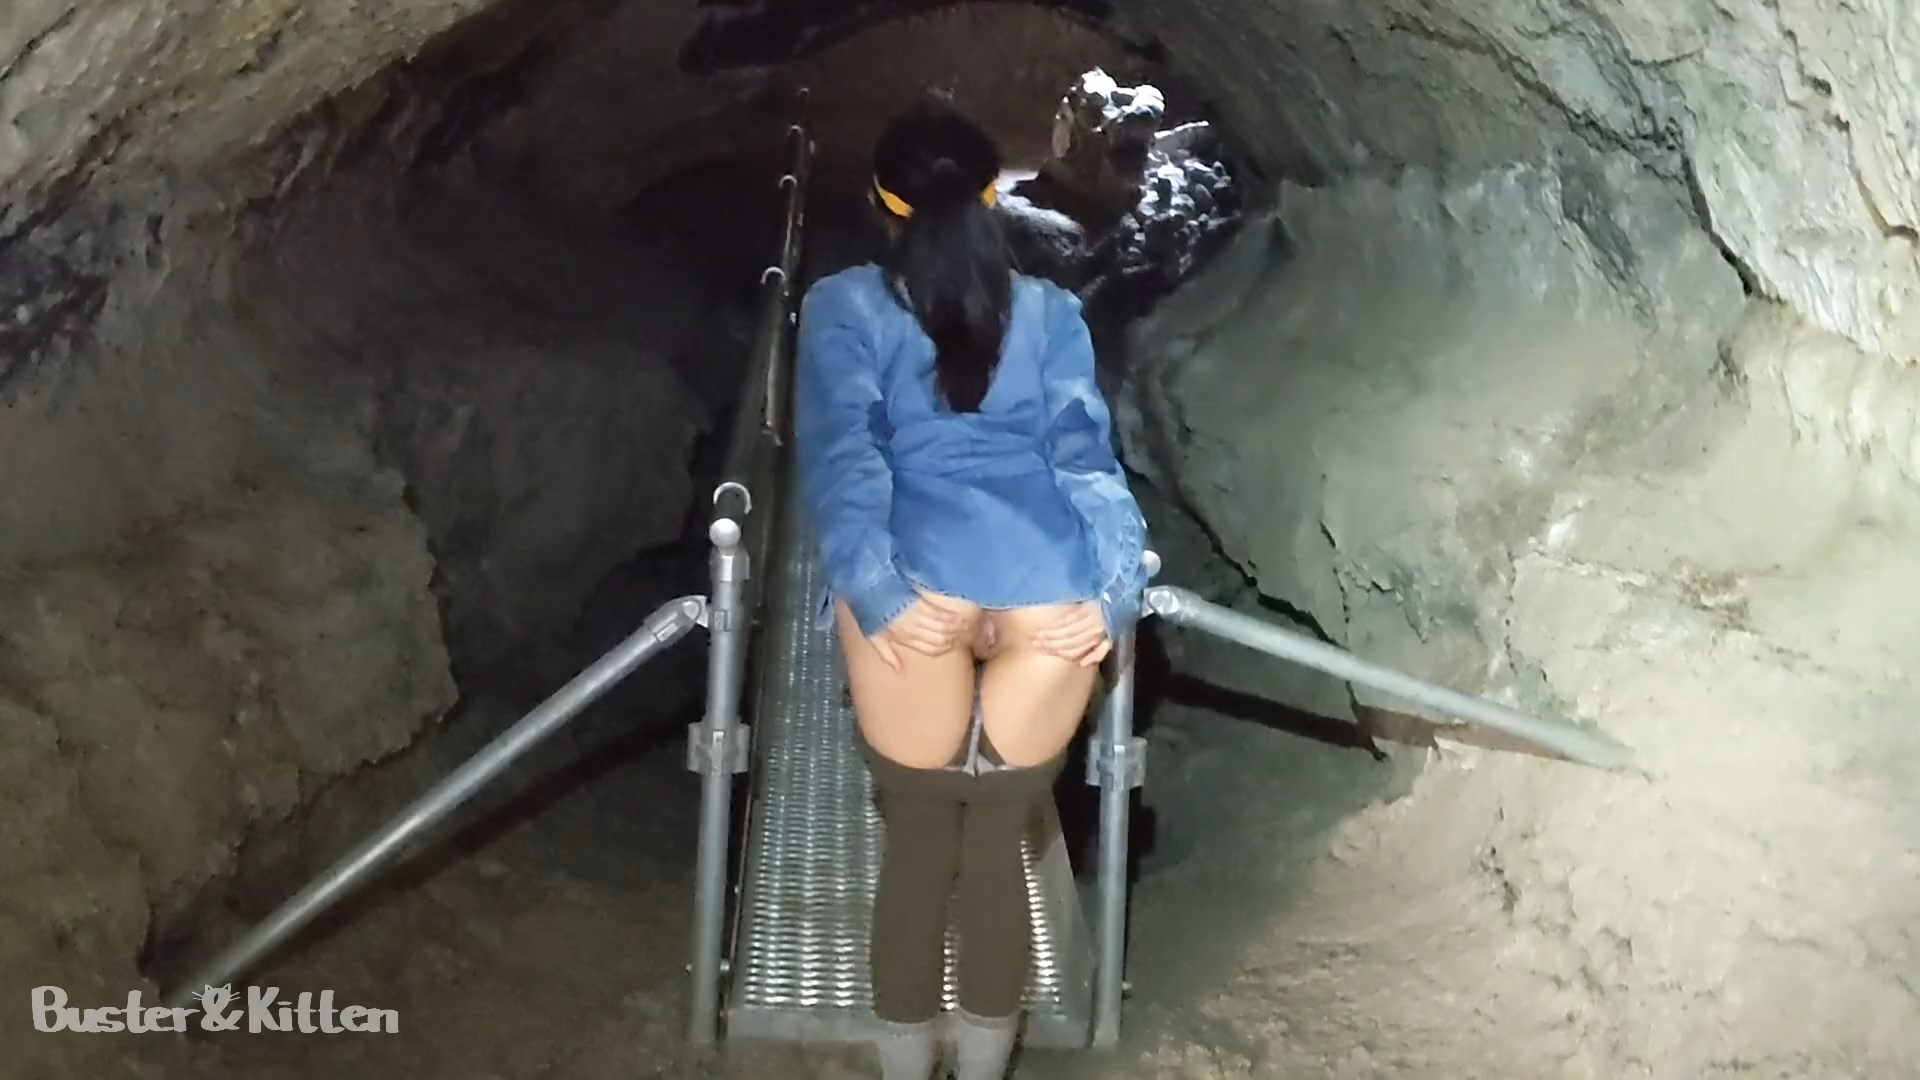 busterandkitten - Sucking daddys dick in a cave 1080p